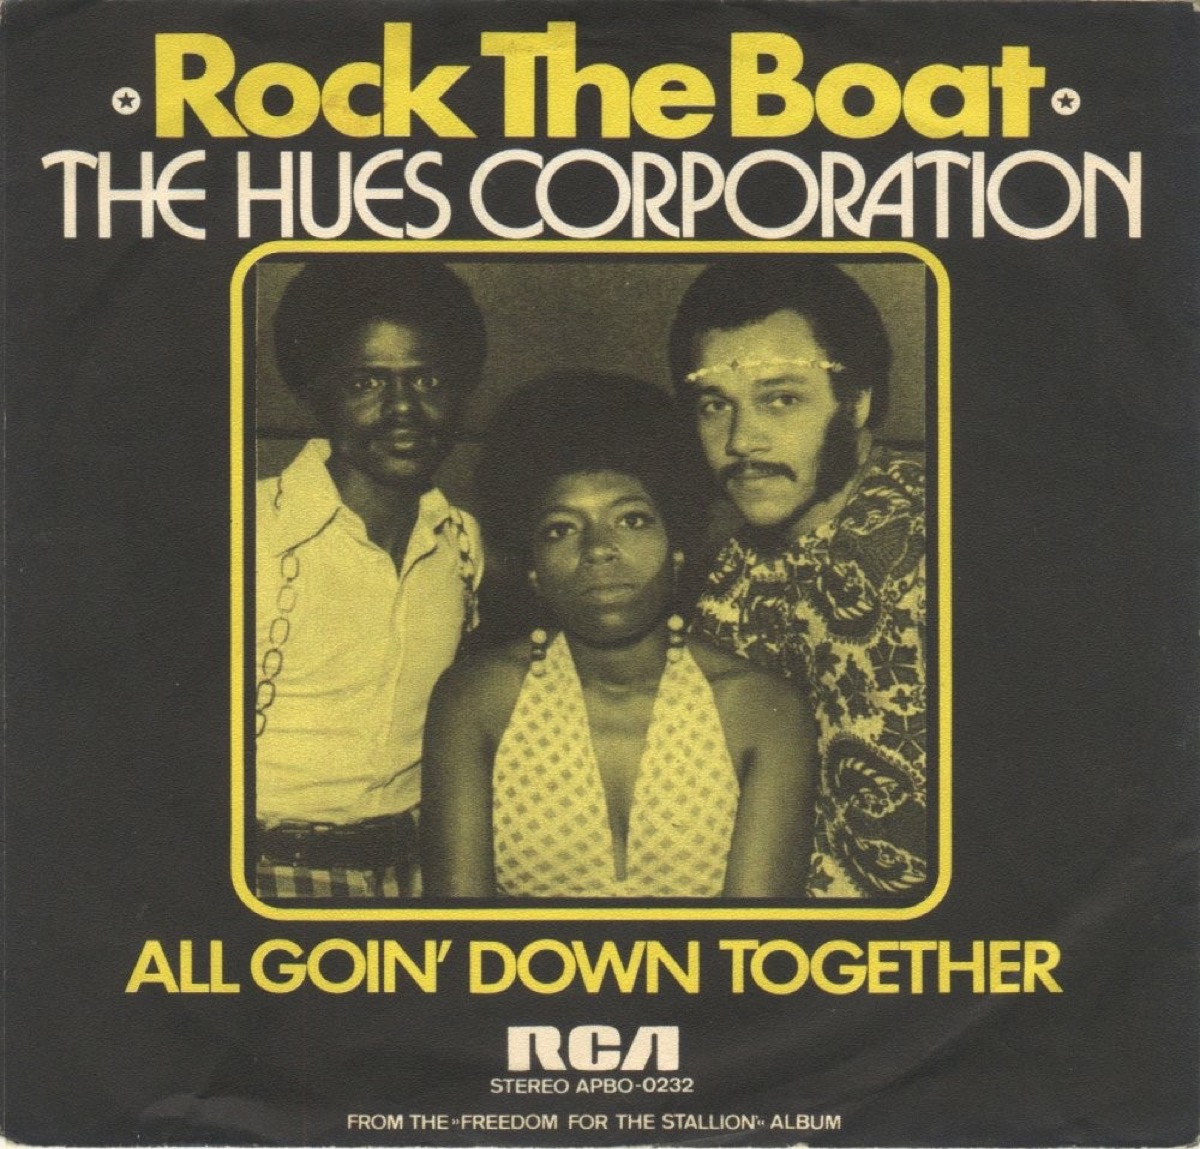 Rock the Boat, The Hues 1970s one hit wonder